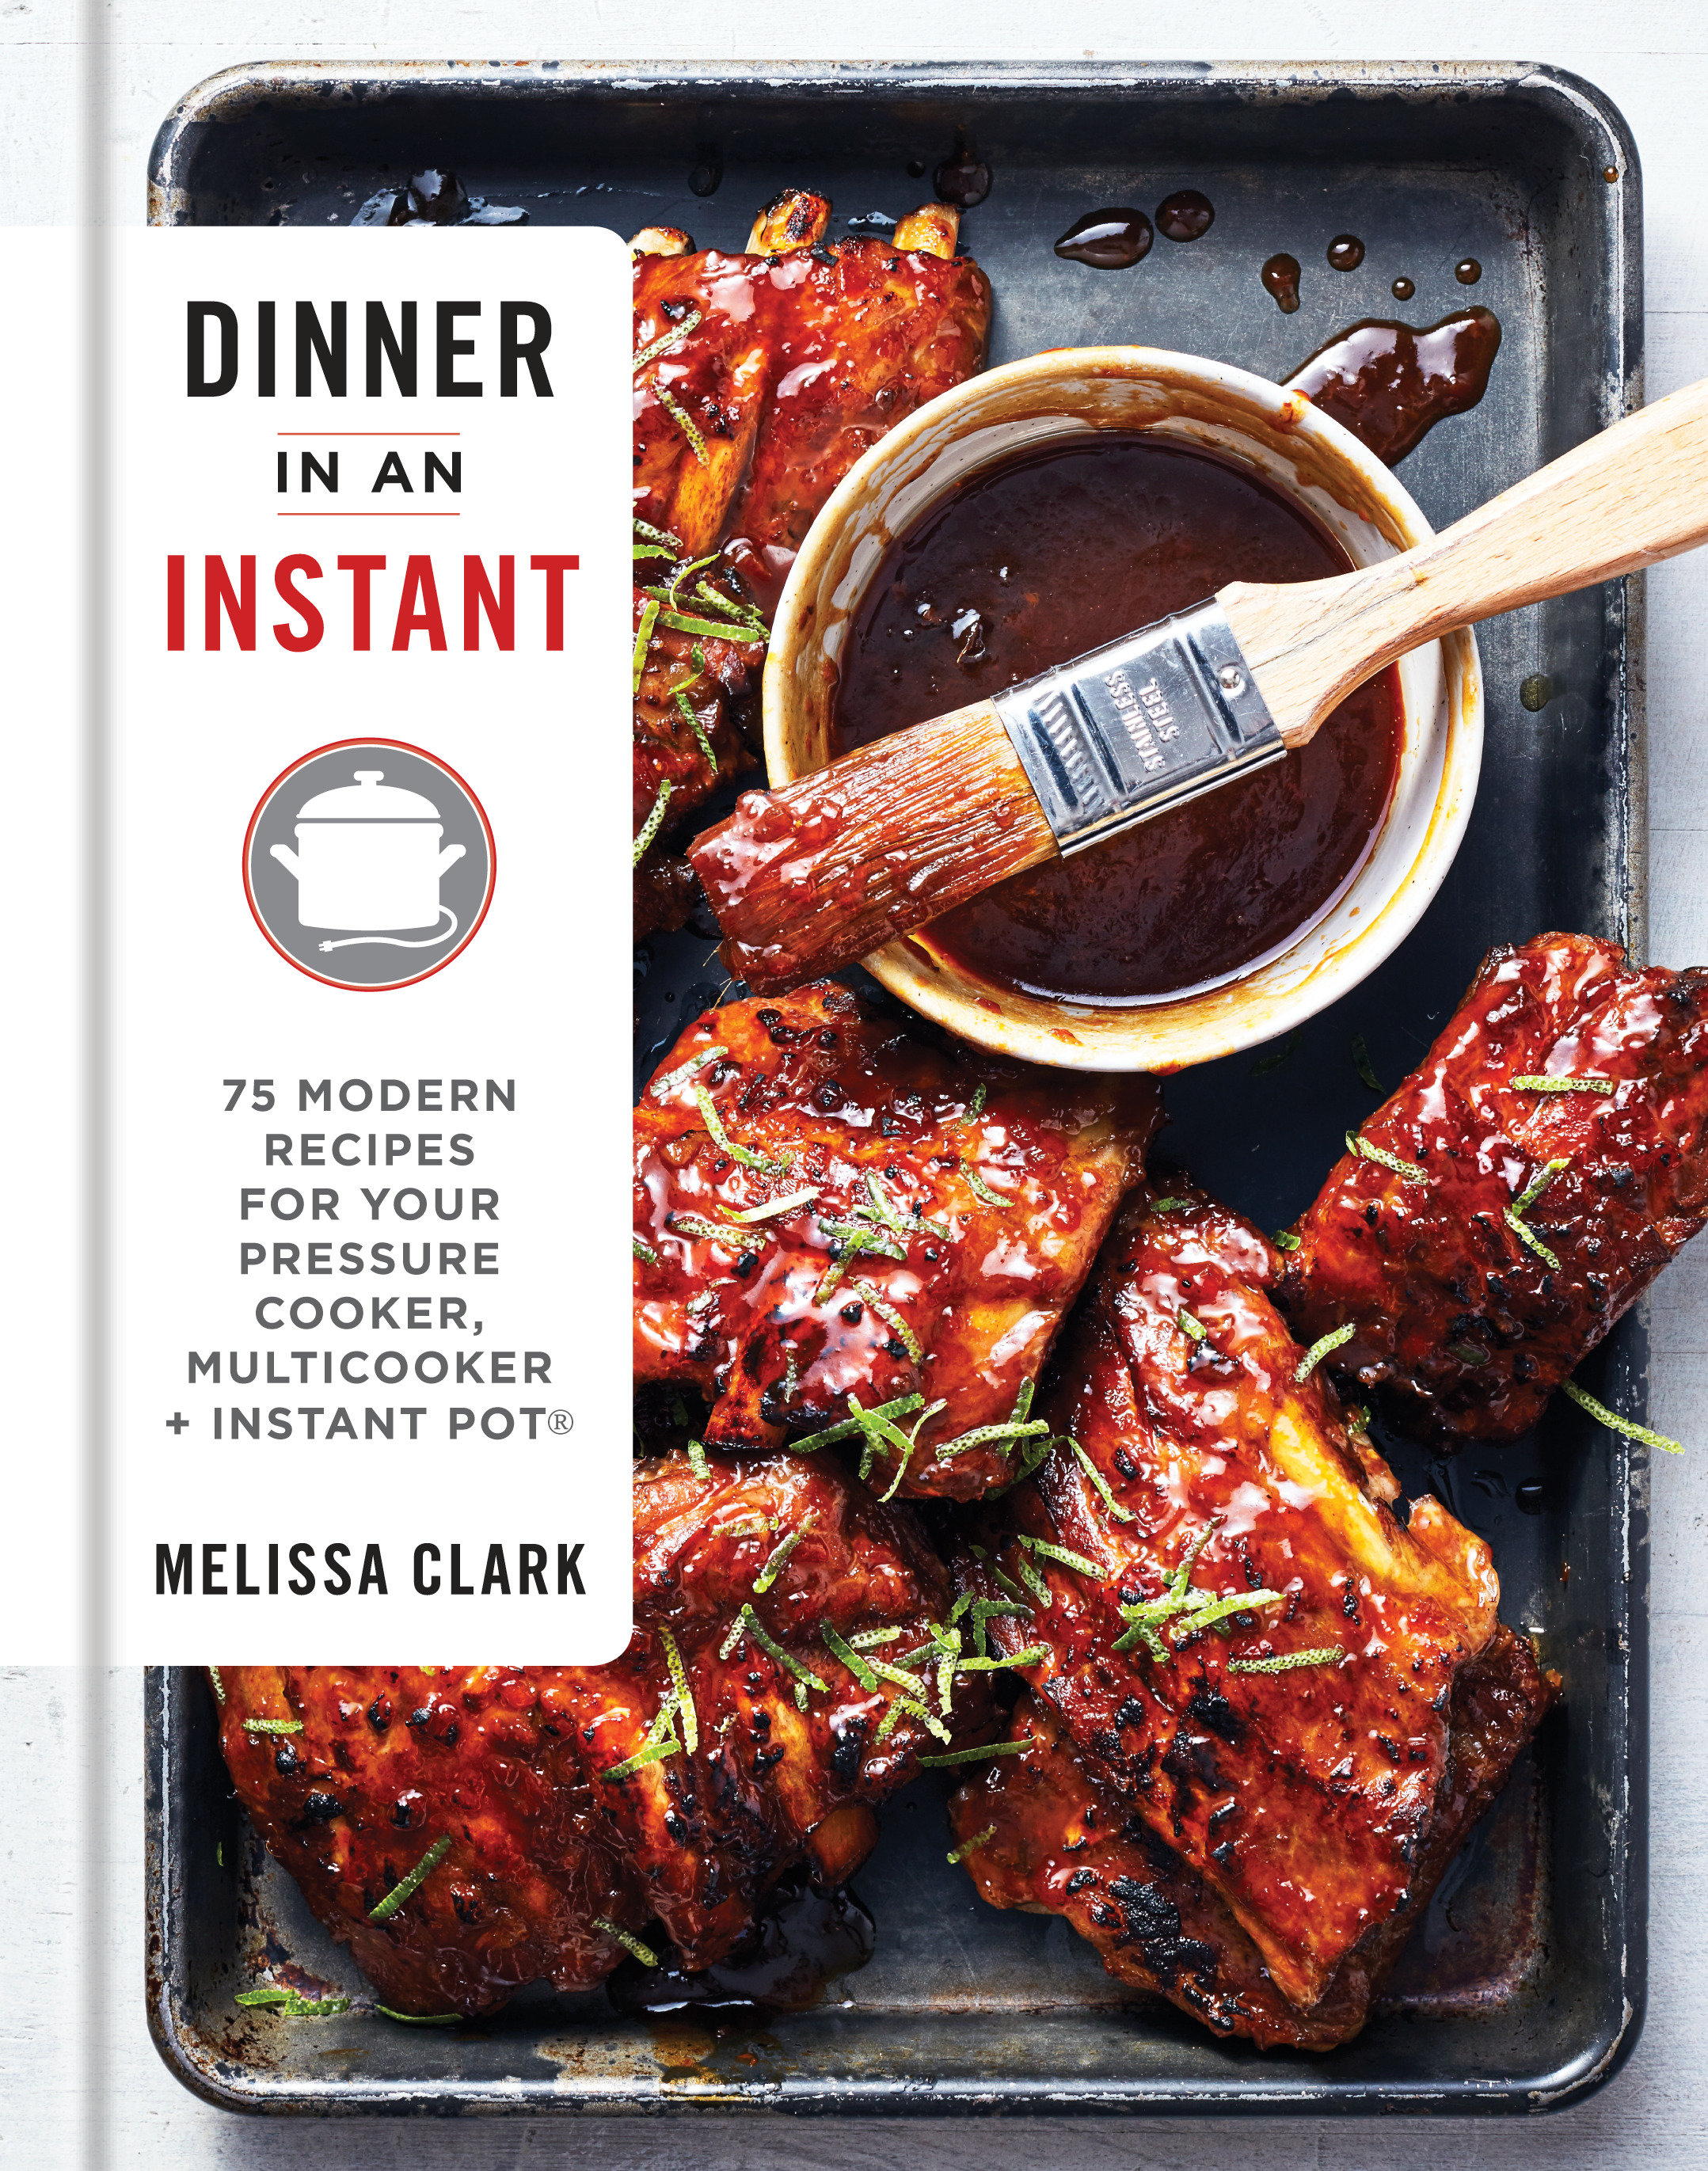 Dinner In An Instant (Hardcover Book)